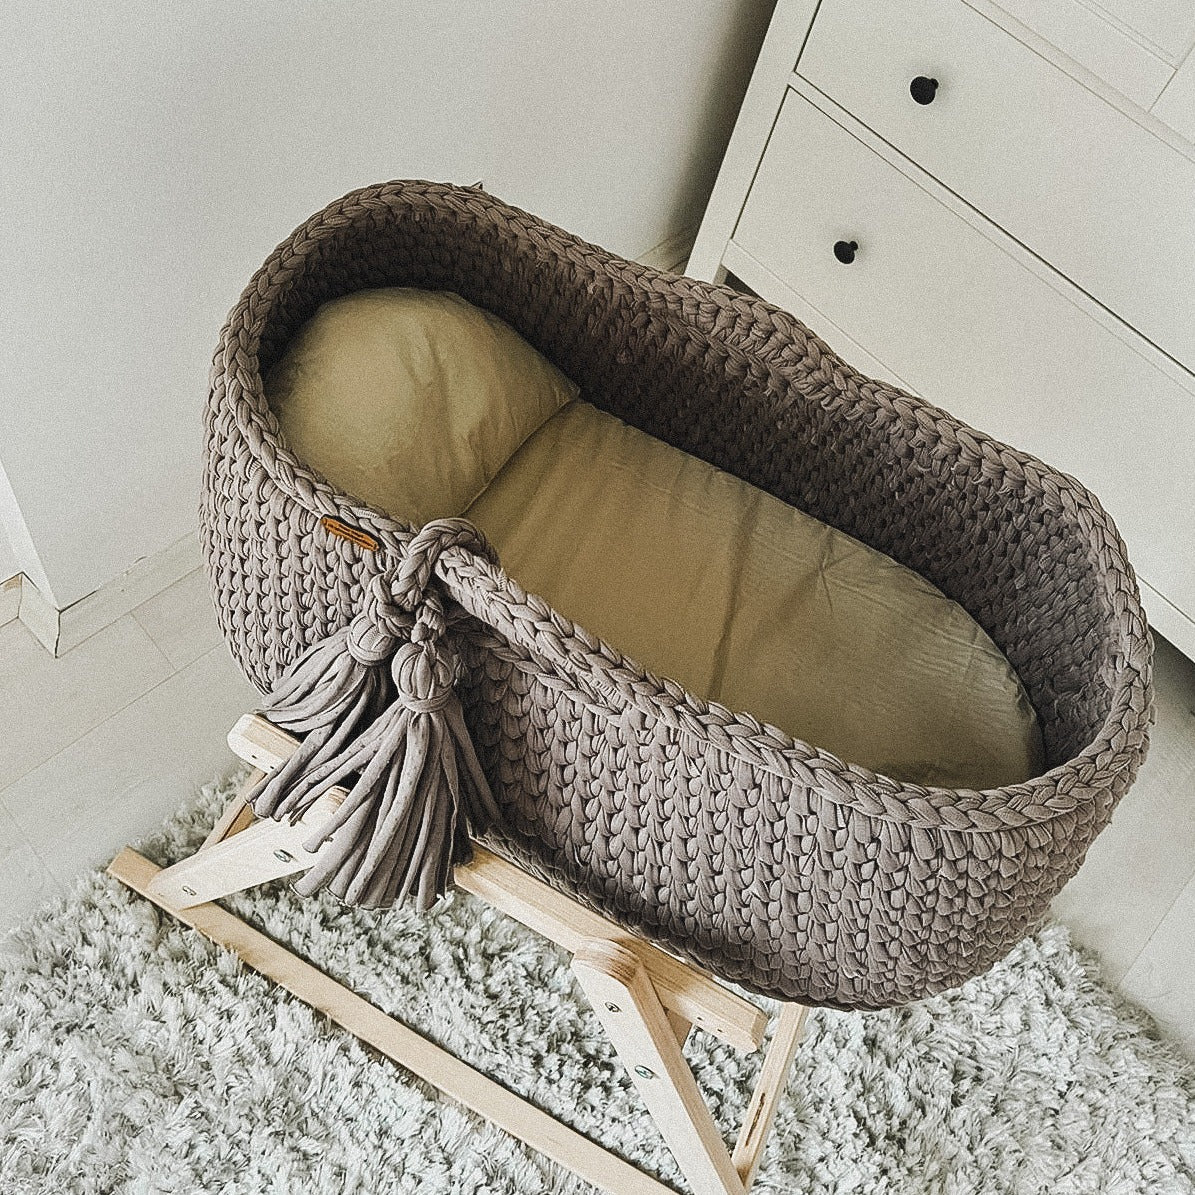 Angel Hand-Knitted Baby Bassinet - Light Brown